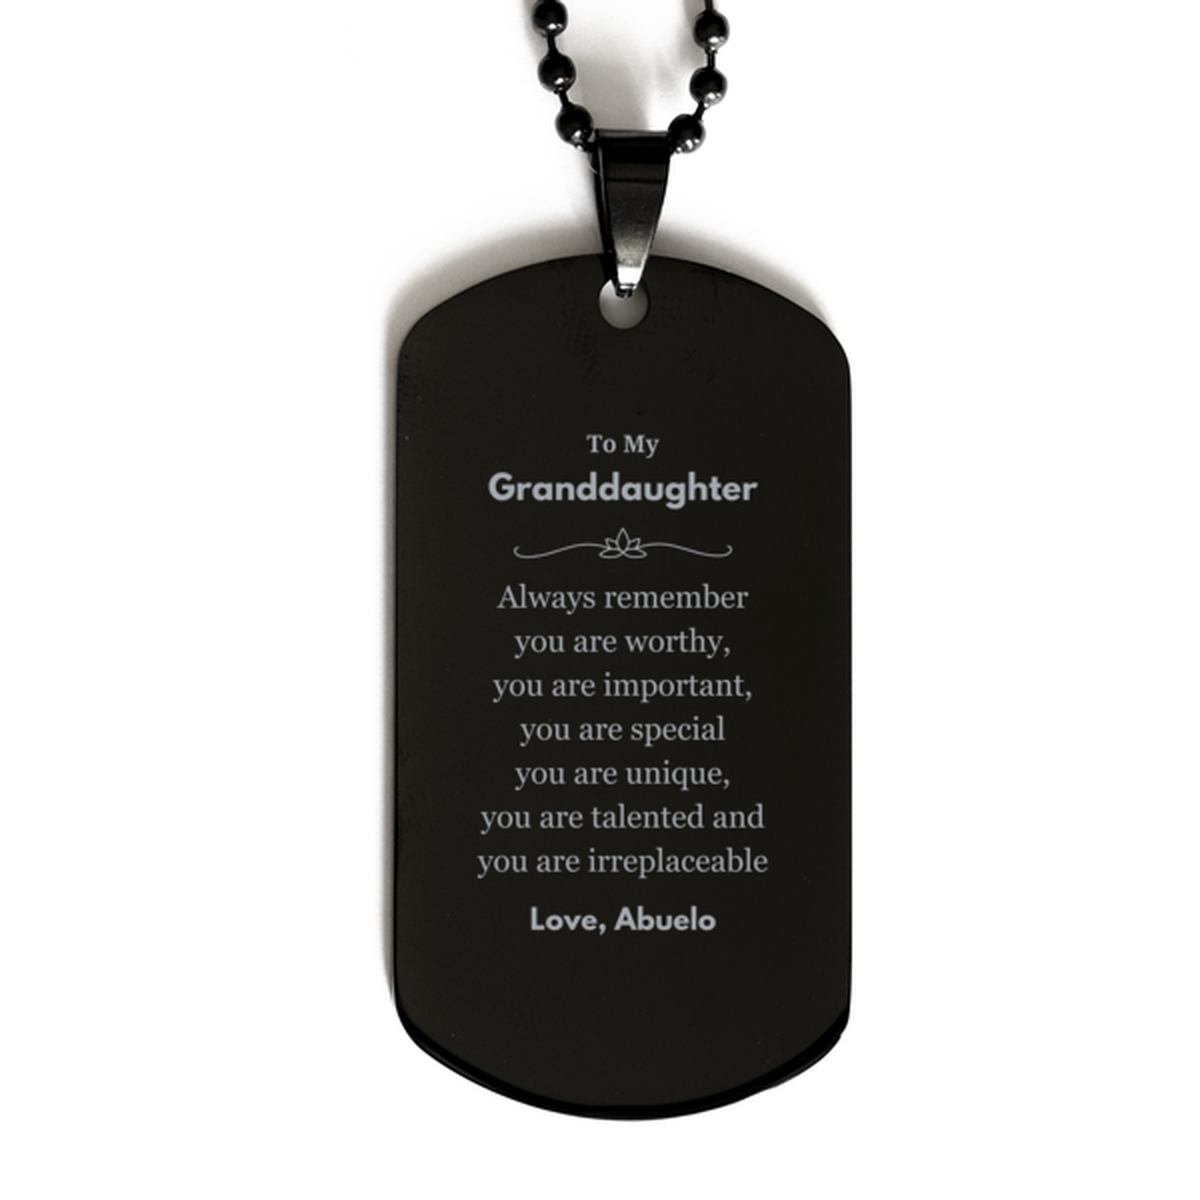 Granddaughter Birthday Gifts from Abuelo, Inspirational Black Dog Tag for Granddaughter Christmas Graduation Gifts for Granddaughter Always remember you are worthy, you are important. Love, Abuelo